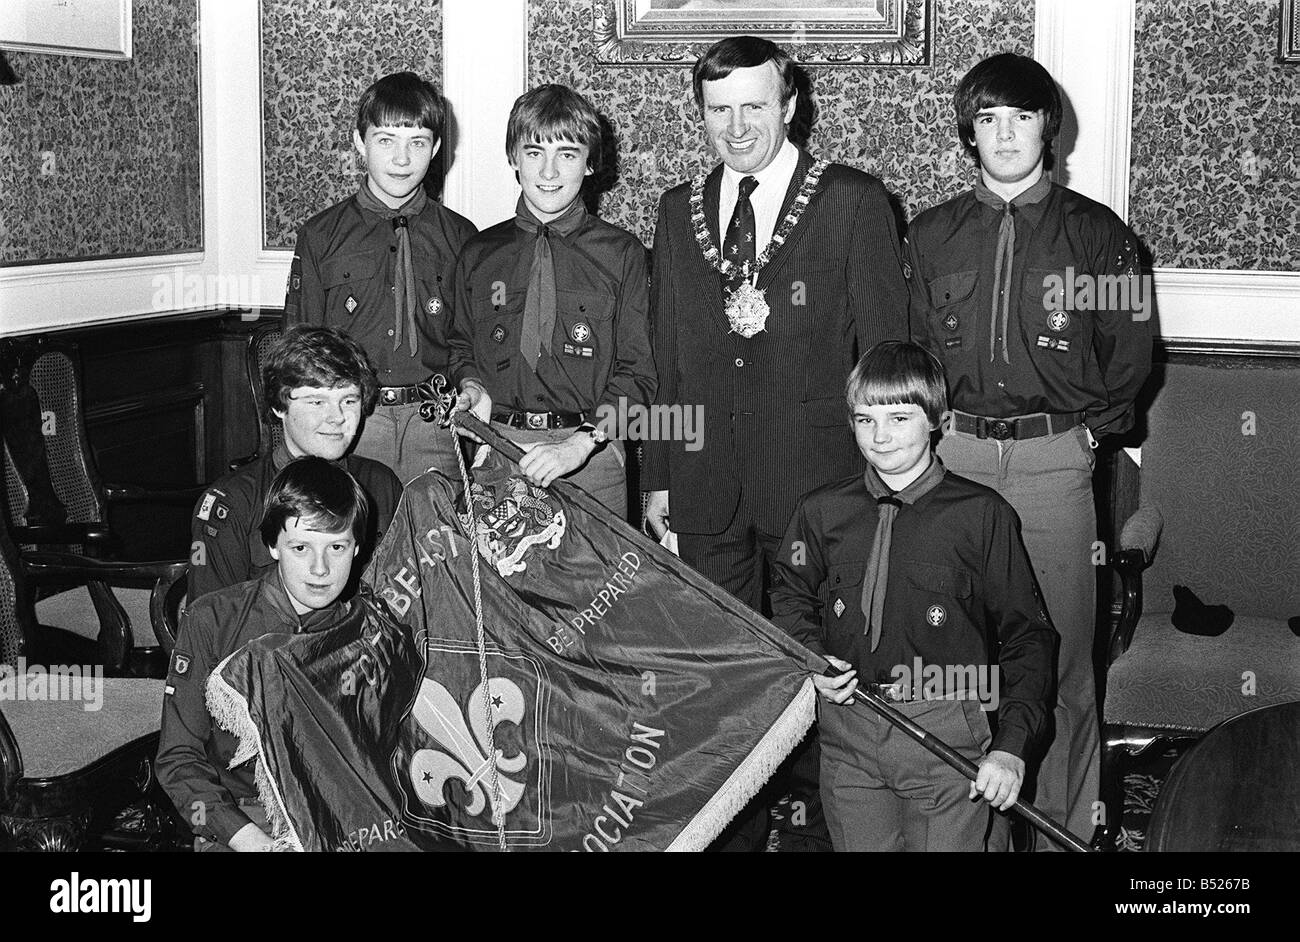 Presentation Of The County Scout Flag October 1980 The Lord Mayor Alderman John Carson presenting the county Scout flag to the winning troup Team leader Charles Montgomery Neil Thompson Neil Sinclair Alistair McCarley Mark Roberts and Neil McCullough from 10th East Belfast Scouts Newtownards The boys were awarded the flag when they won a camping and general scouting competition at Crawfordsburn Scout camp Stock Photo